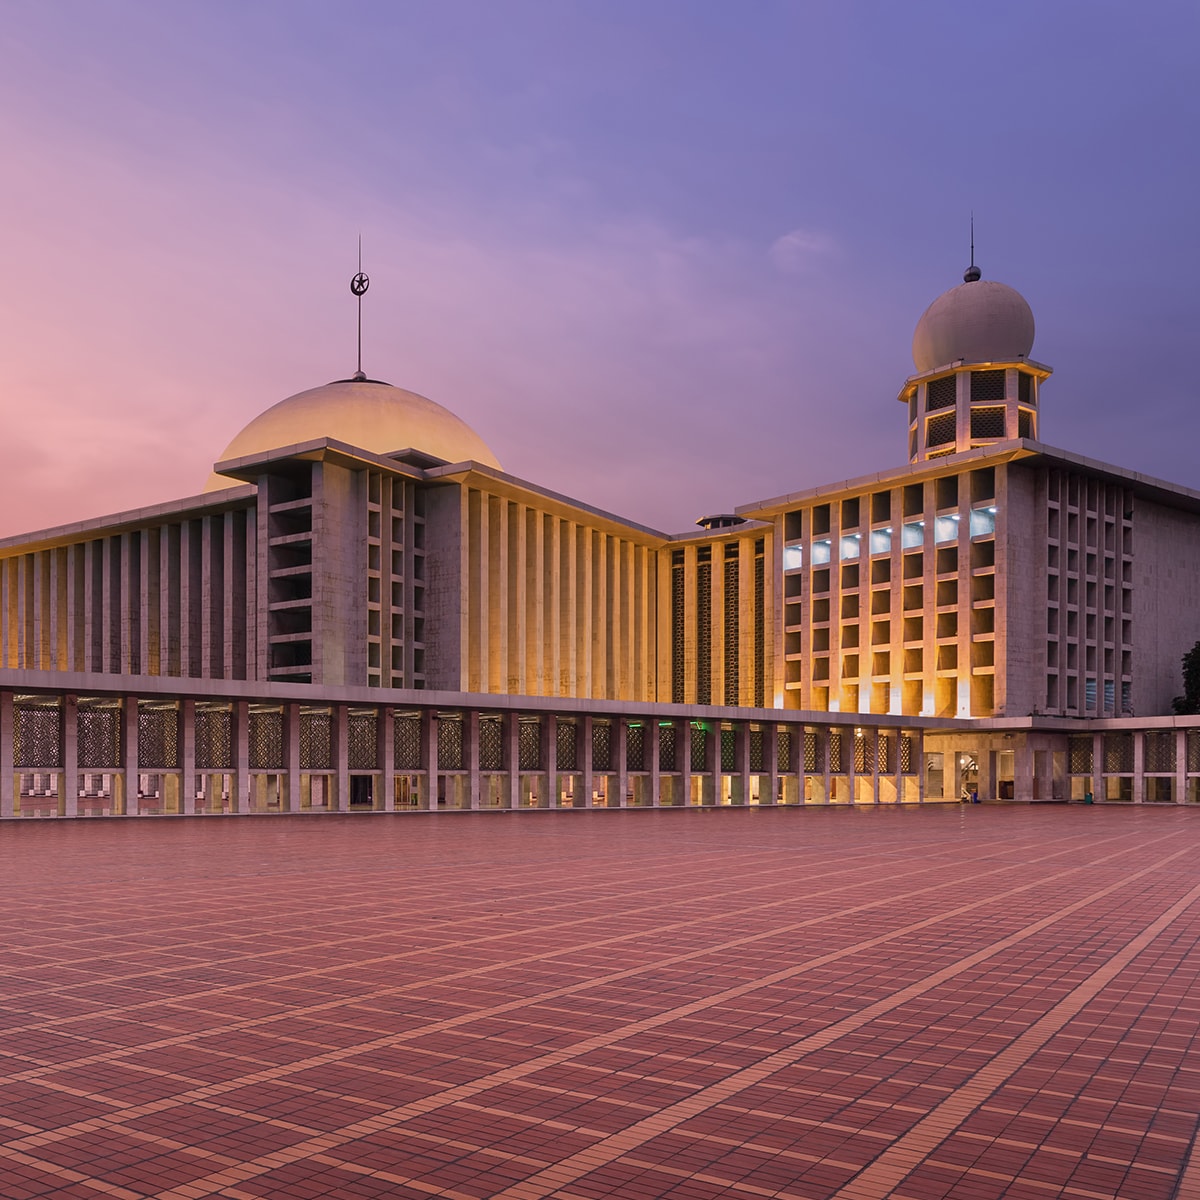 The Grand Istiqlal Mosque